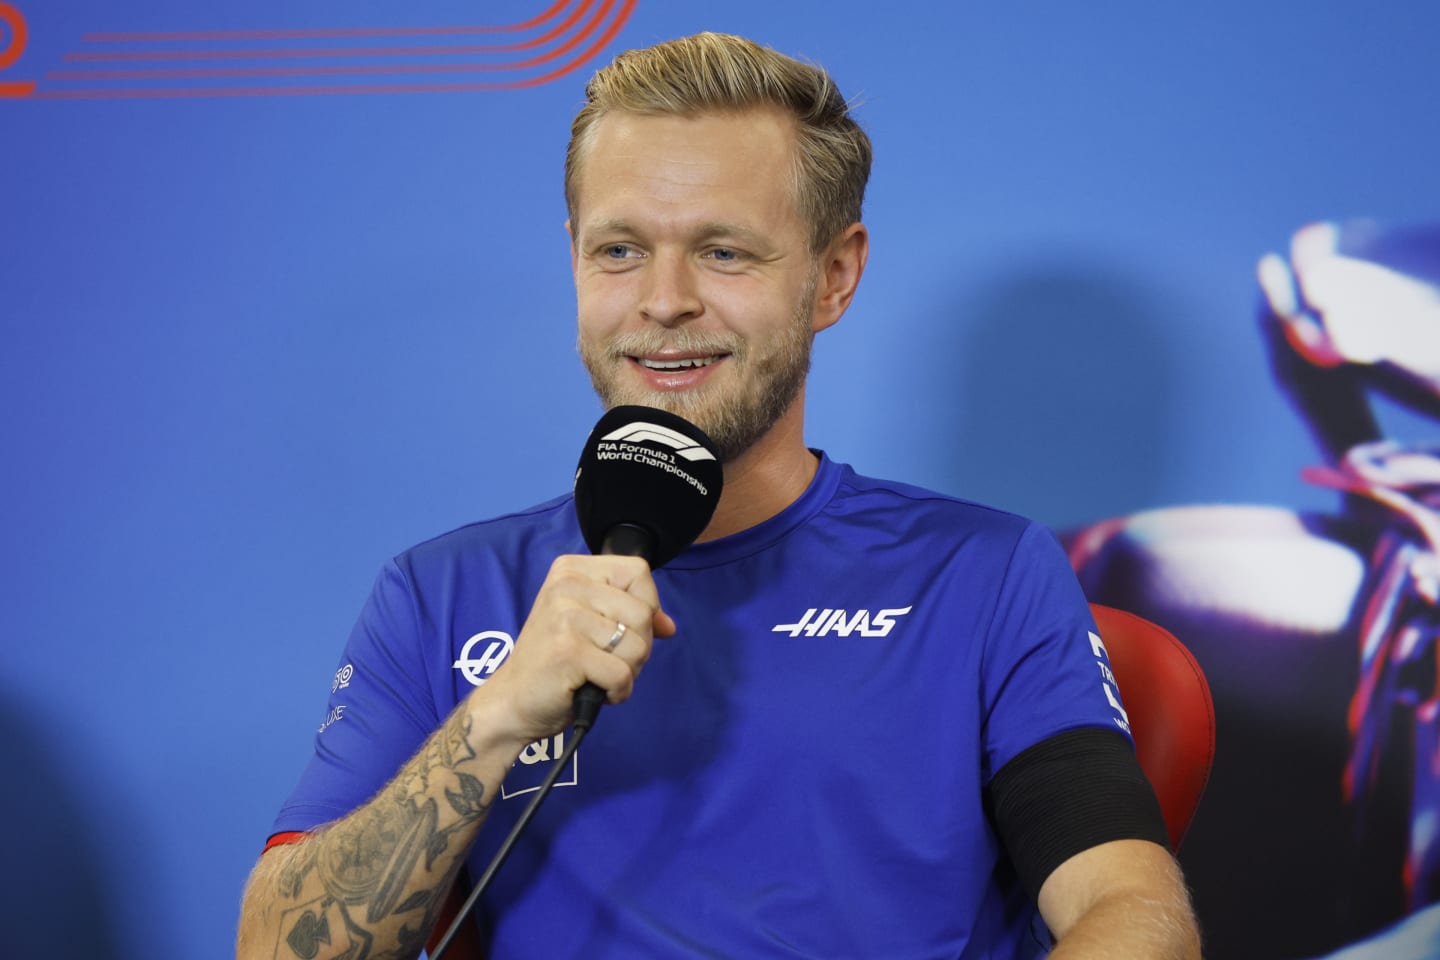 AUSTIN, TEXAS - OCTOBER 20: Kevin Magnussen of Denmark and Haas F1 attends the Drivers Press Conference during previews ahead of the F1 Grand Prix of USA at Circuit of The Americas on October 20, 2022 in Austin, Texas. (Photo by Jared C. Tilton/Getty Images)